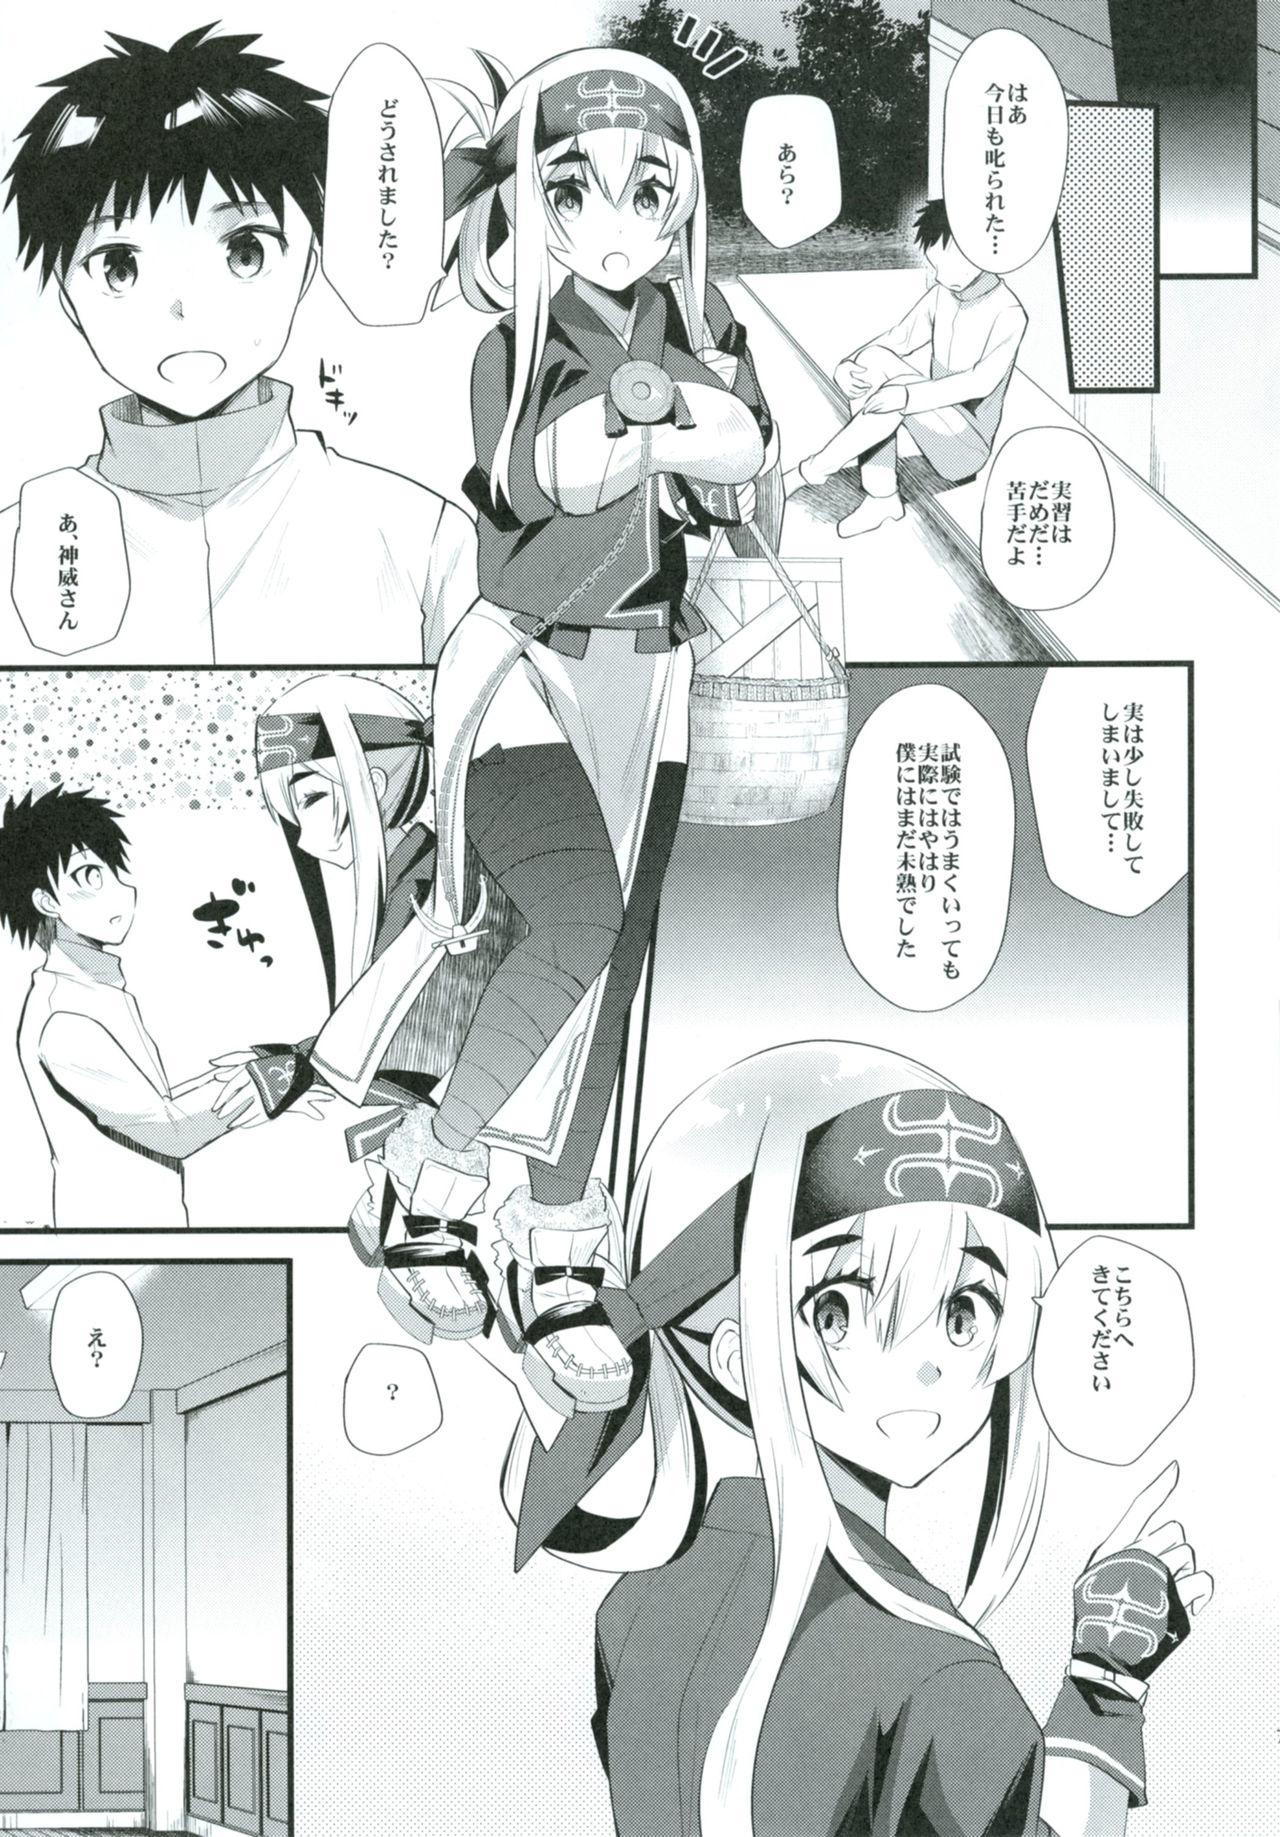 Boy Fuck Girl Pirka Ruanpe - Kantai collection Officesex - Page 6